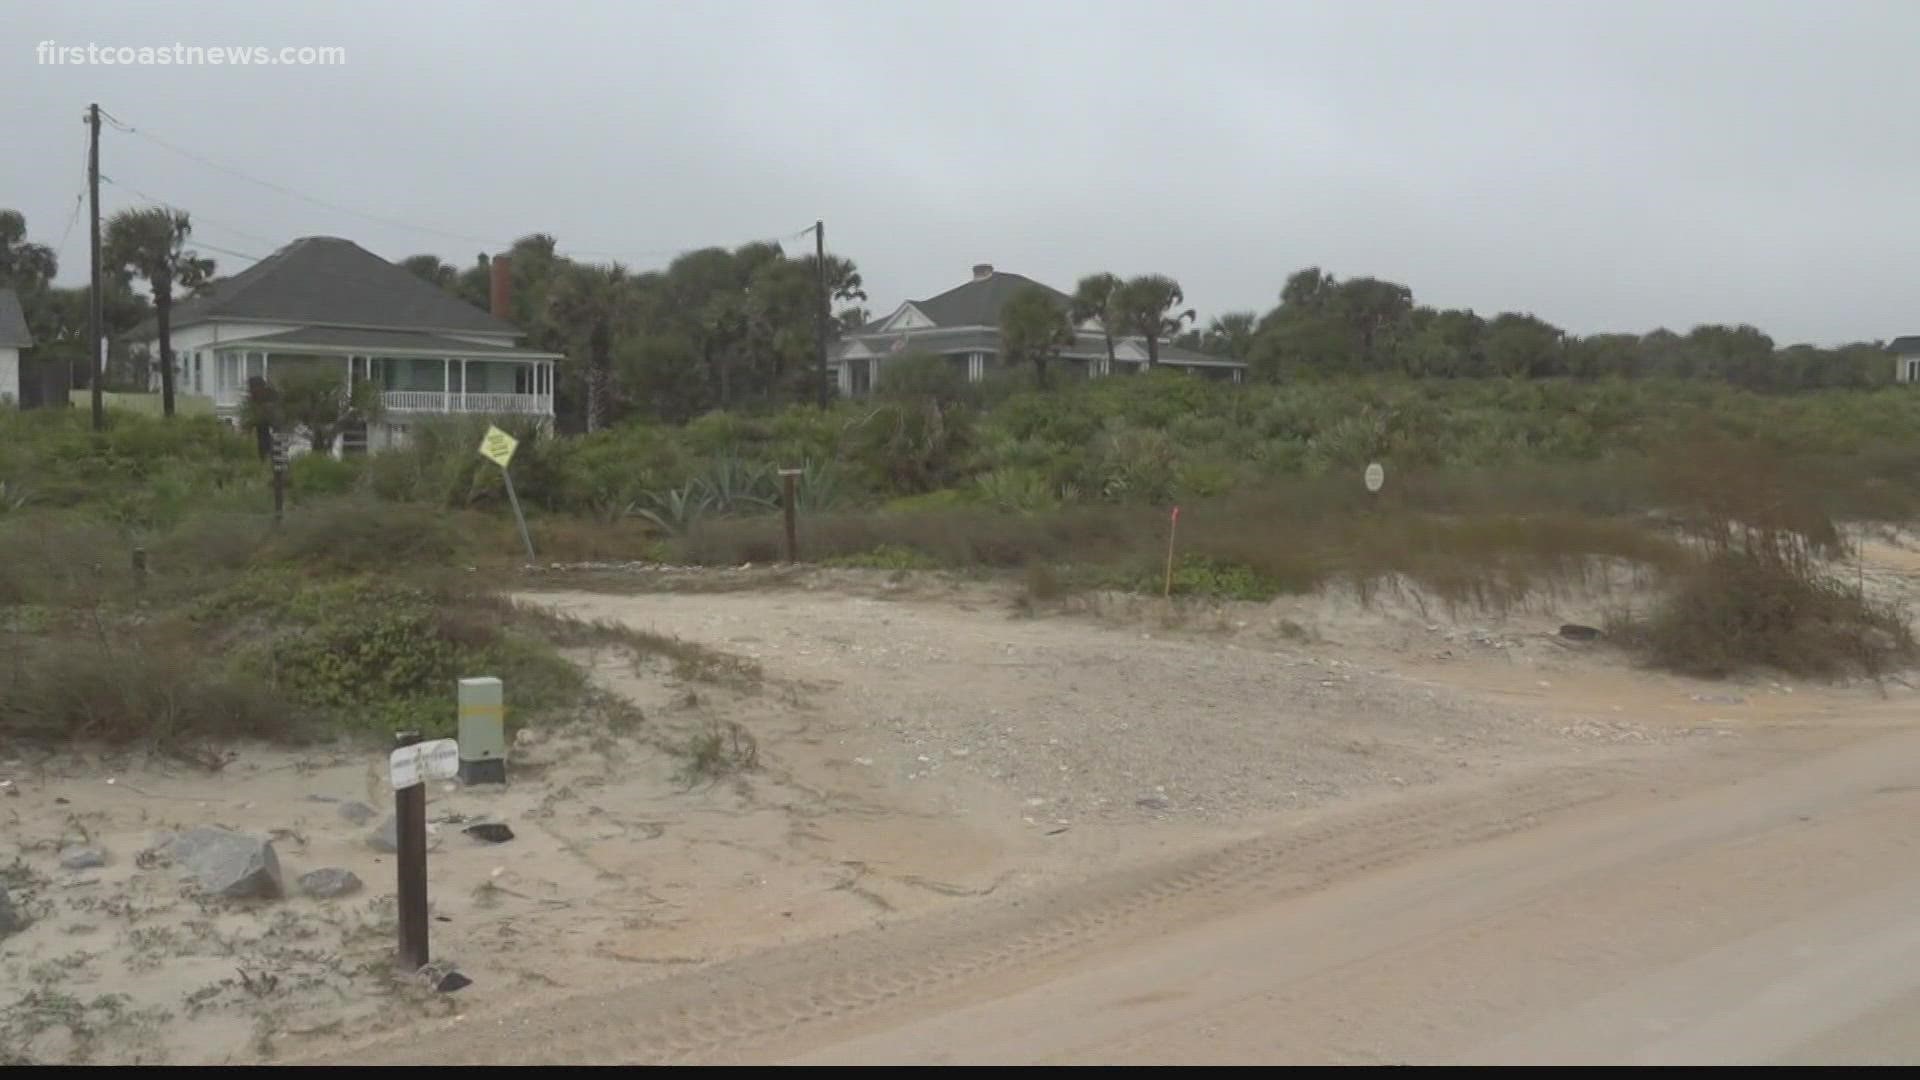 One commissioner proposed the county purchase homes to allow the beach to go back to its natural state, but the HOA is against the plan.